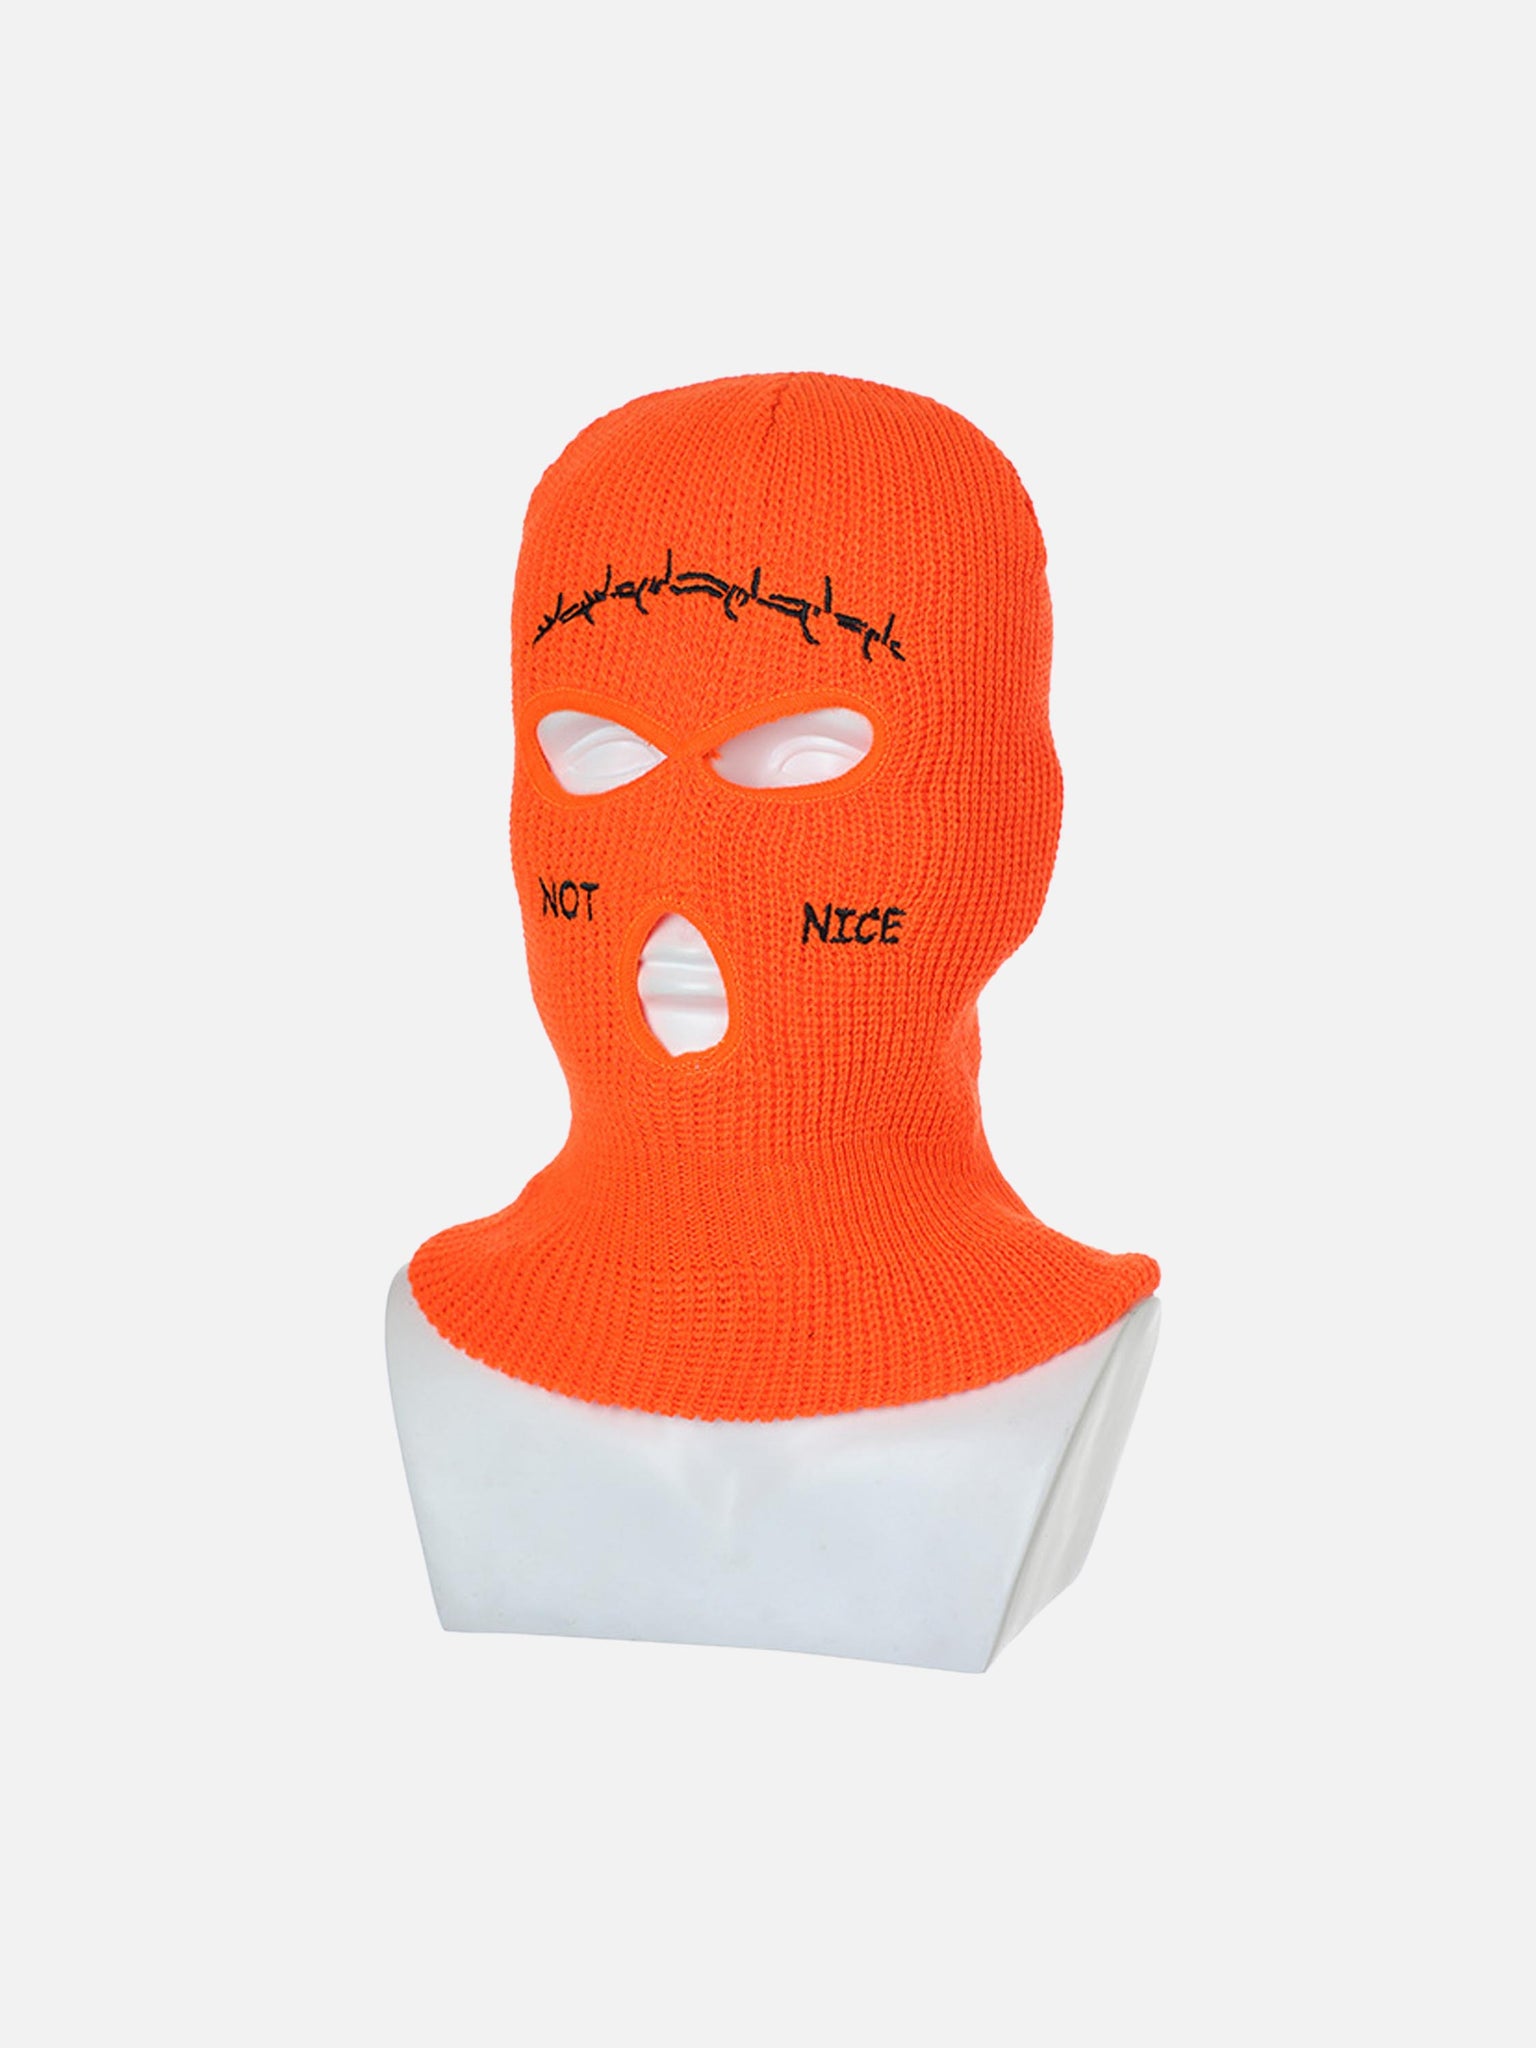 Thesupermade Retro Hip-hop Fun Knitted Warm Ear Protection Mask Headgear